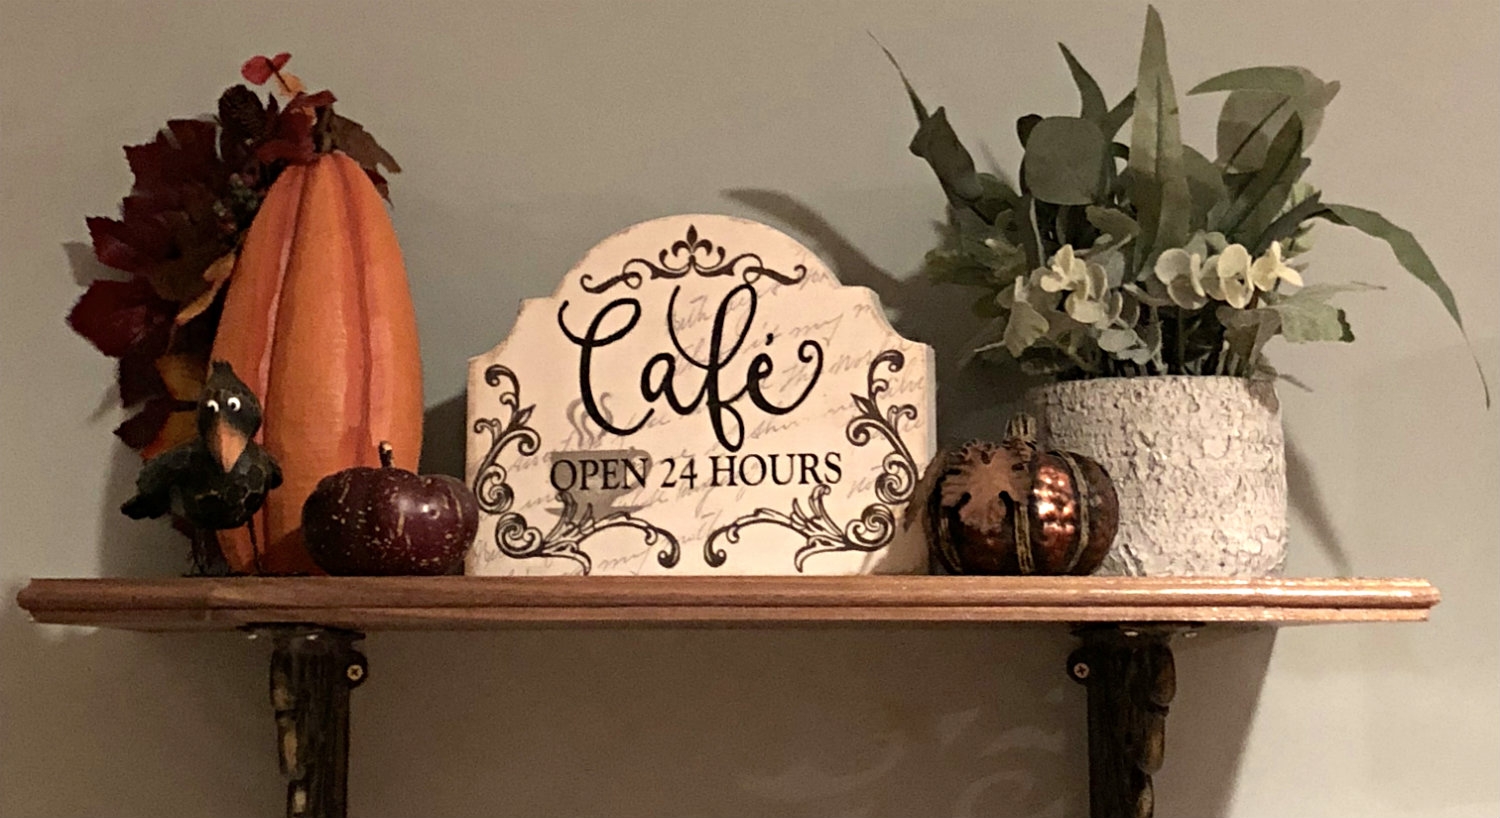 Decorative shelf with sign that reads: Cafe open 24 hours